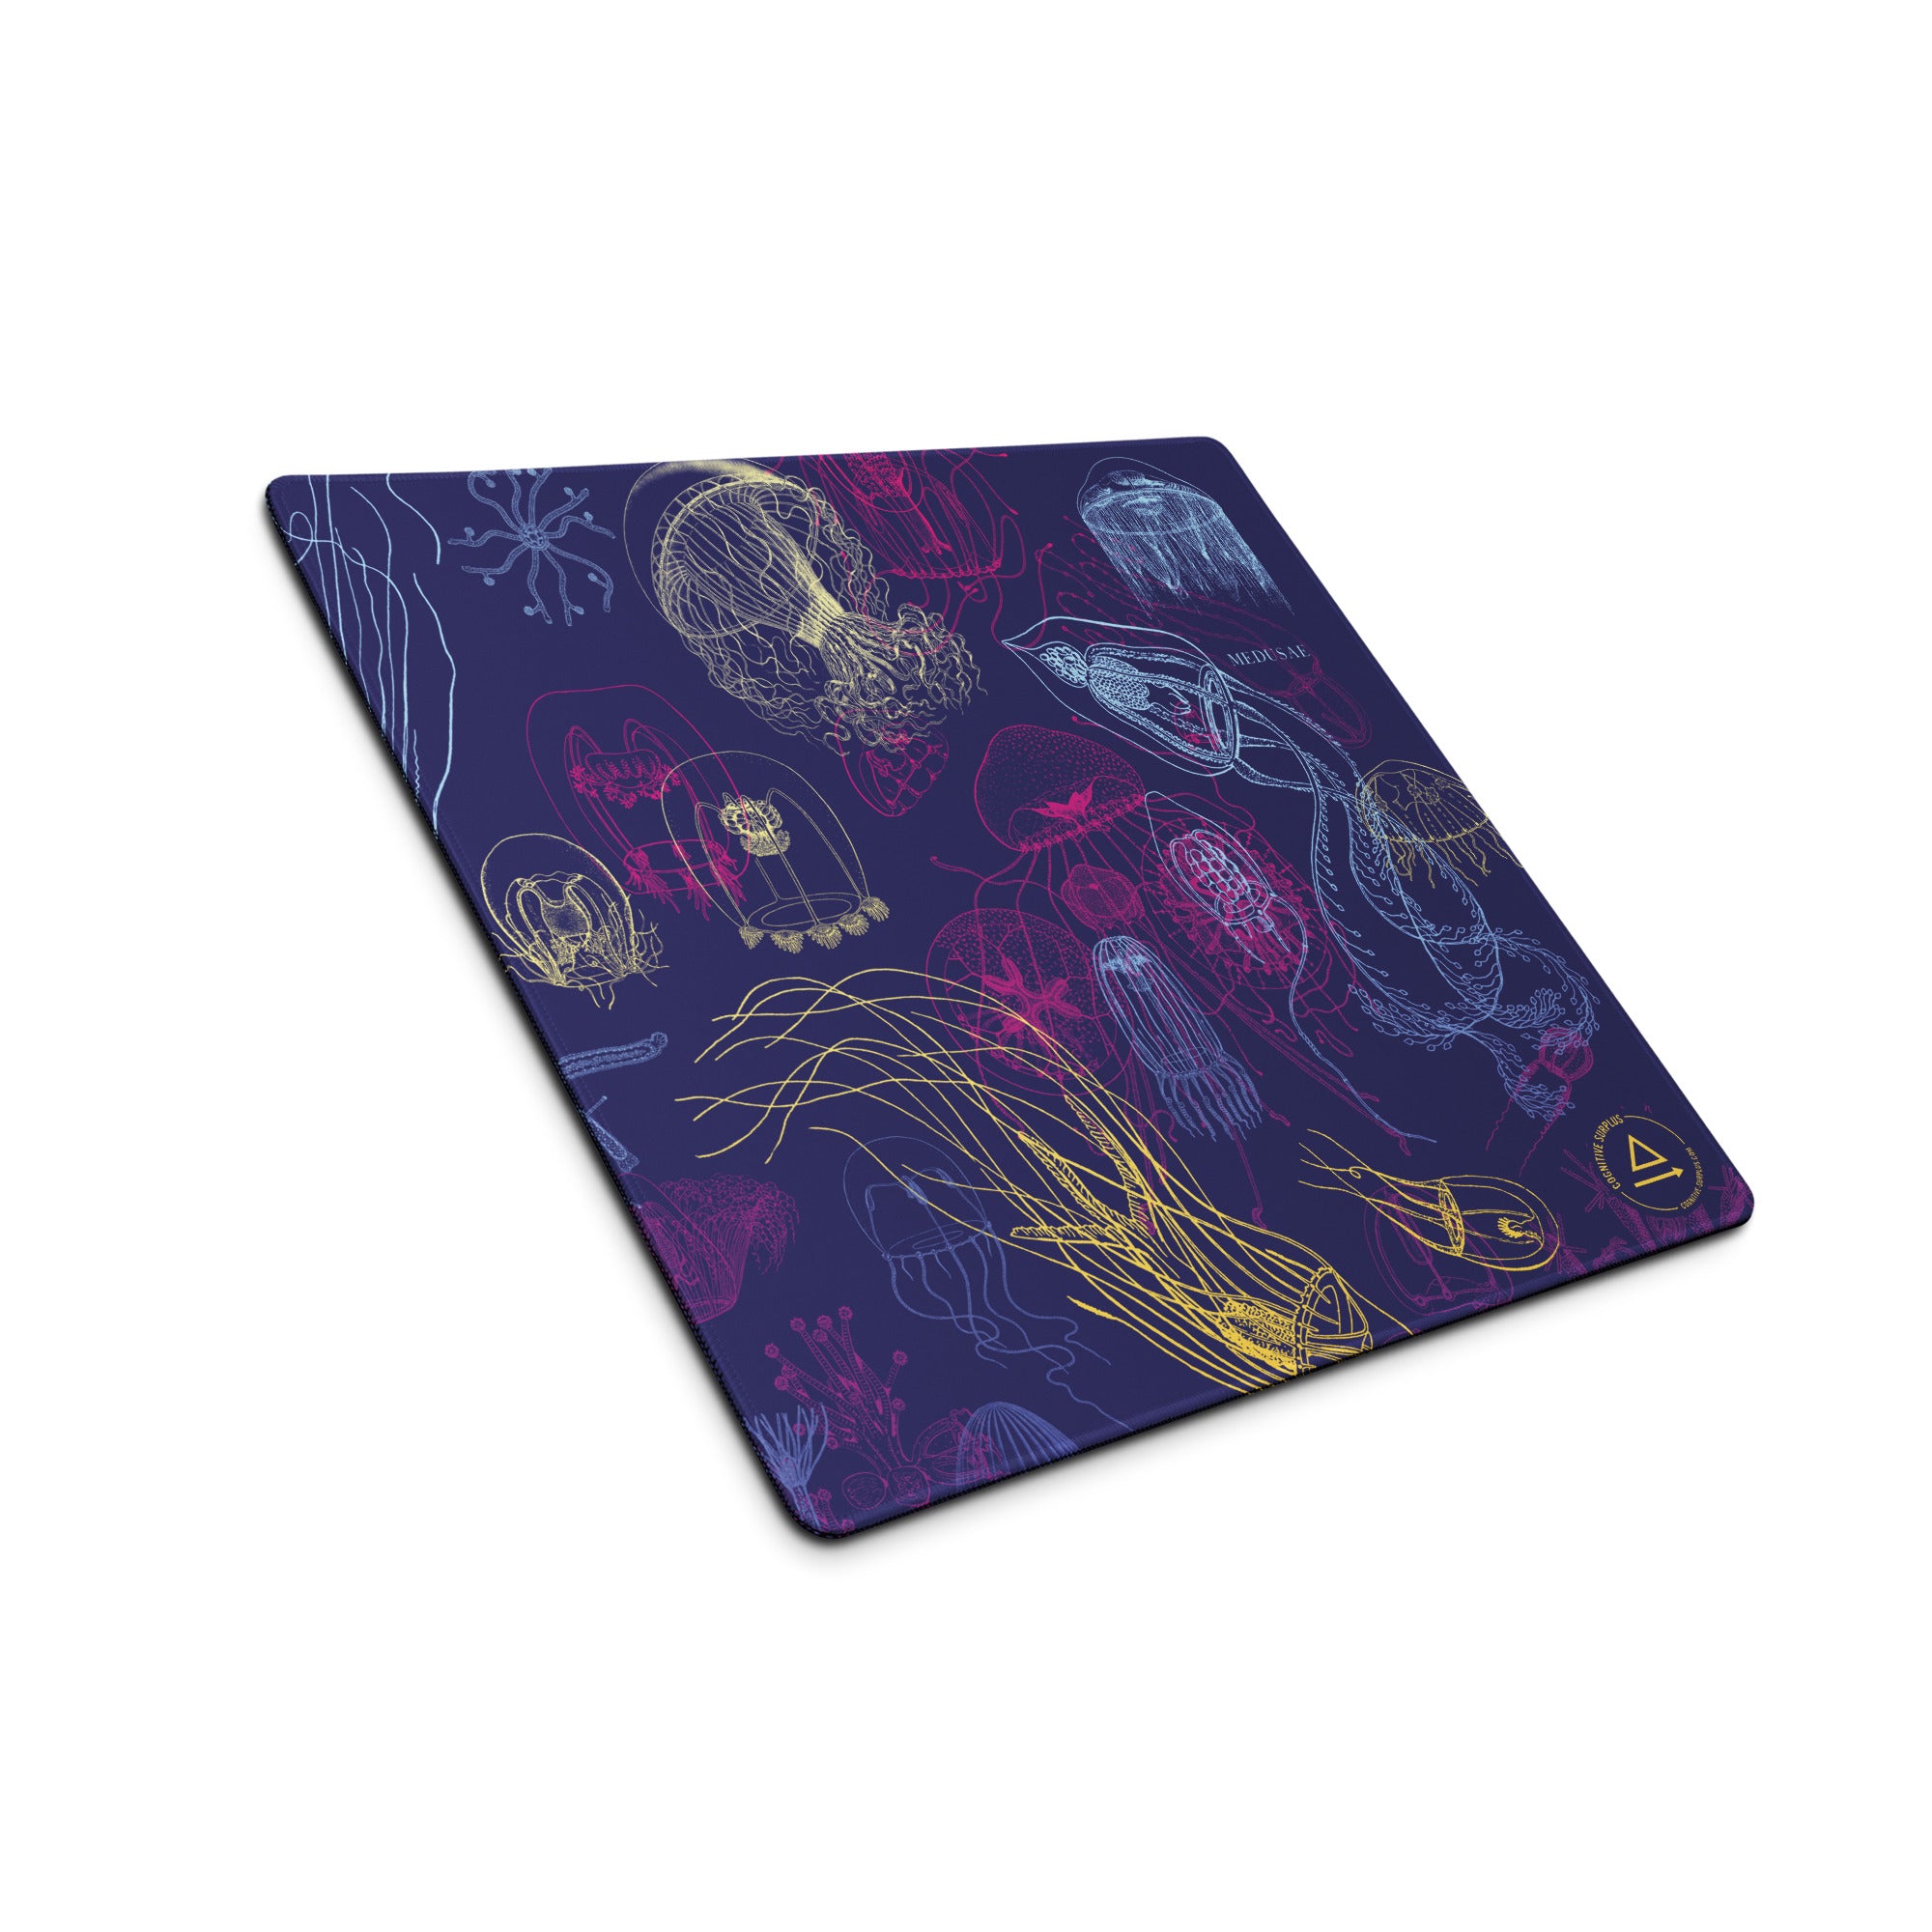 gaming-mouse-pad-white-18x16-front-6595e4b644692.jpg